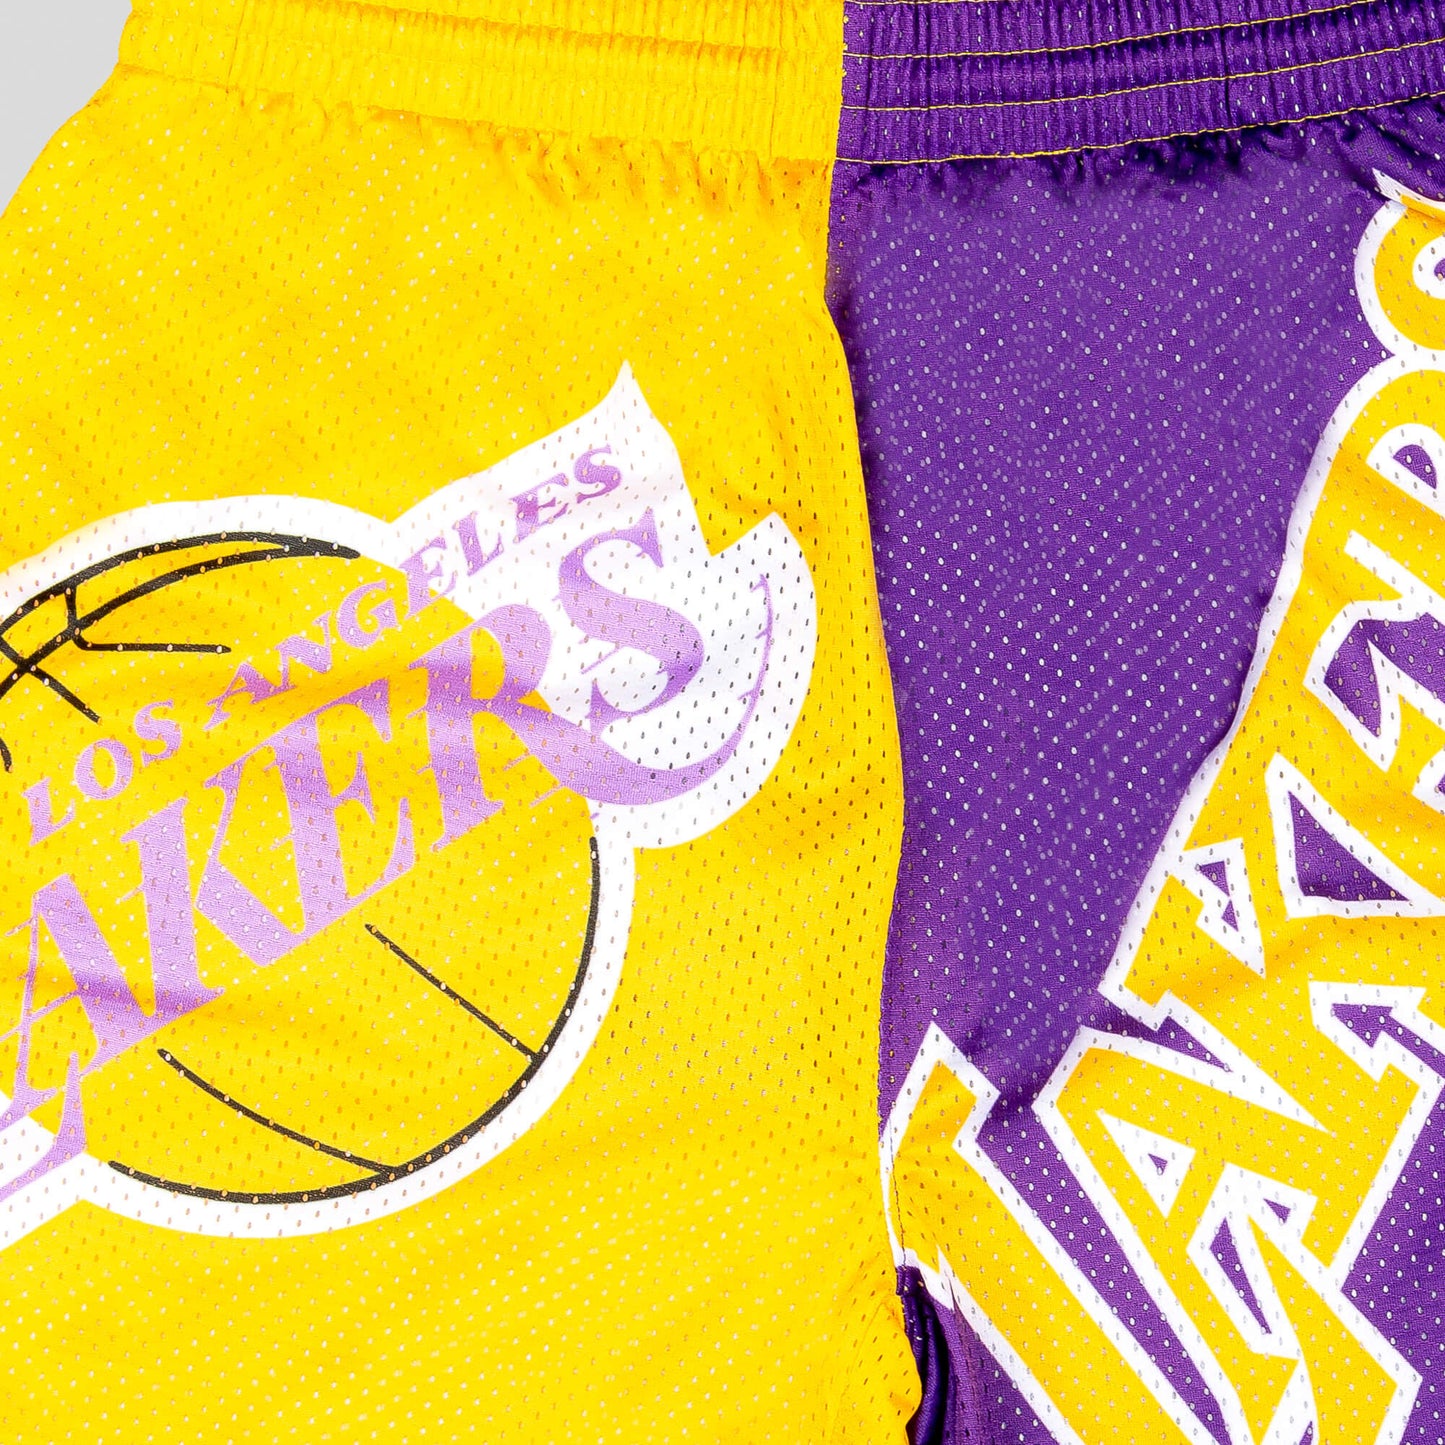 Mitchell And Ness Nba Big Face Shorts 5.0 - 8-20Y Los Angeles Lakers Yellow/Purple/White